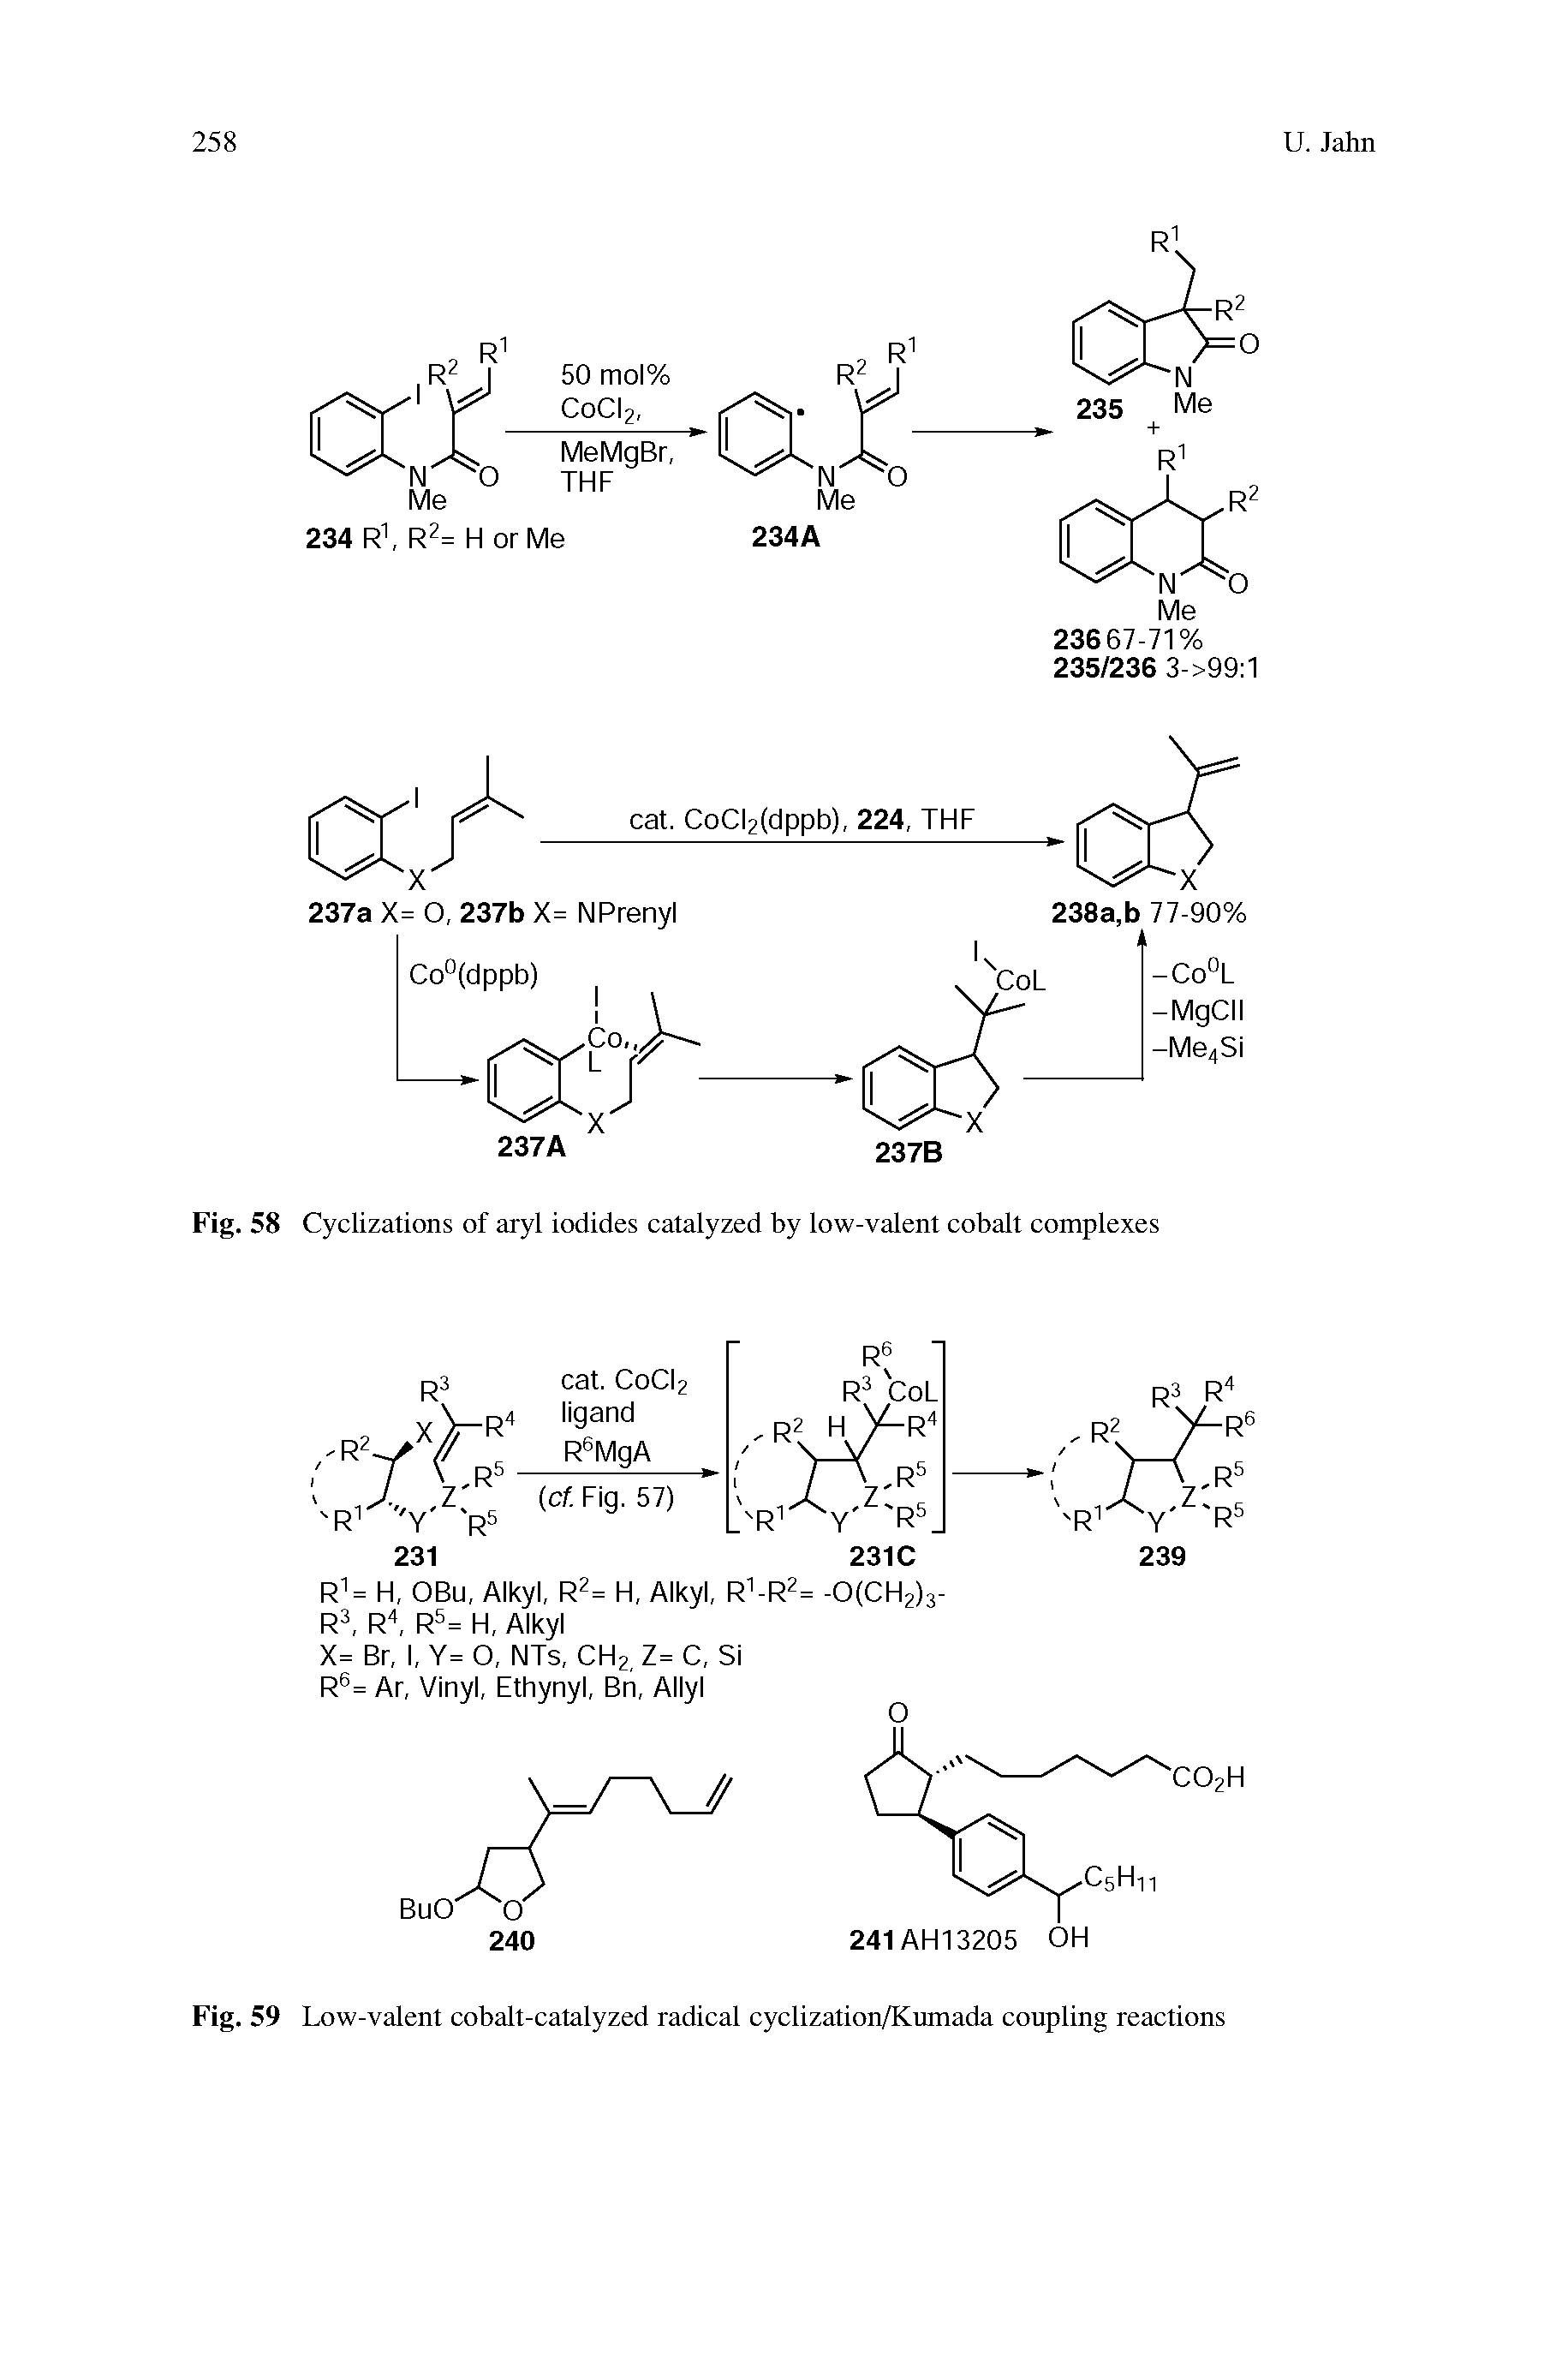 Fig. 58 Cyclizations of aryl iodides catalyzed by low-valent cobalt complexes...